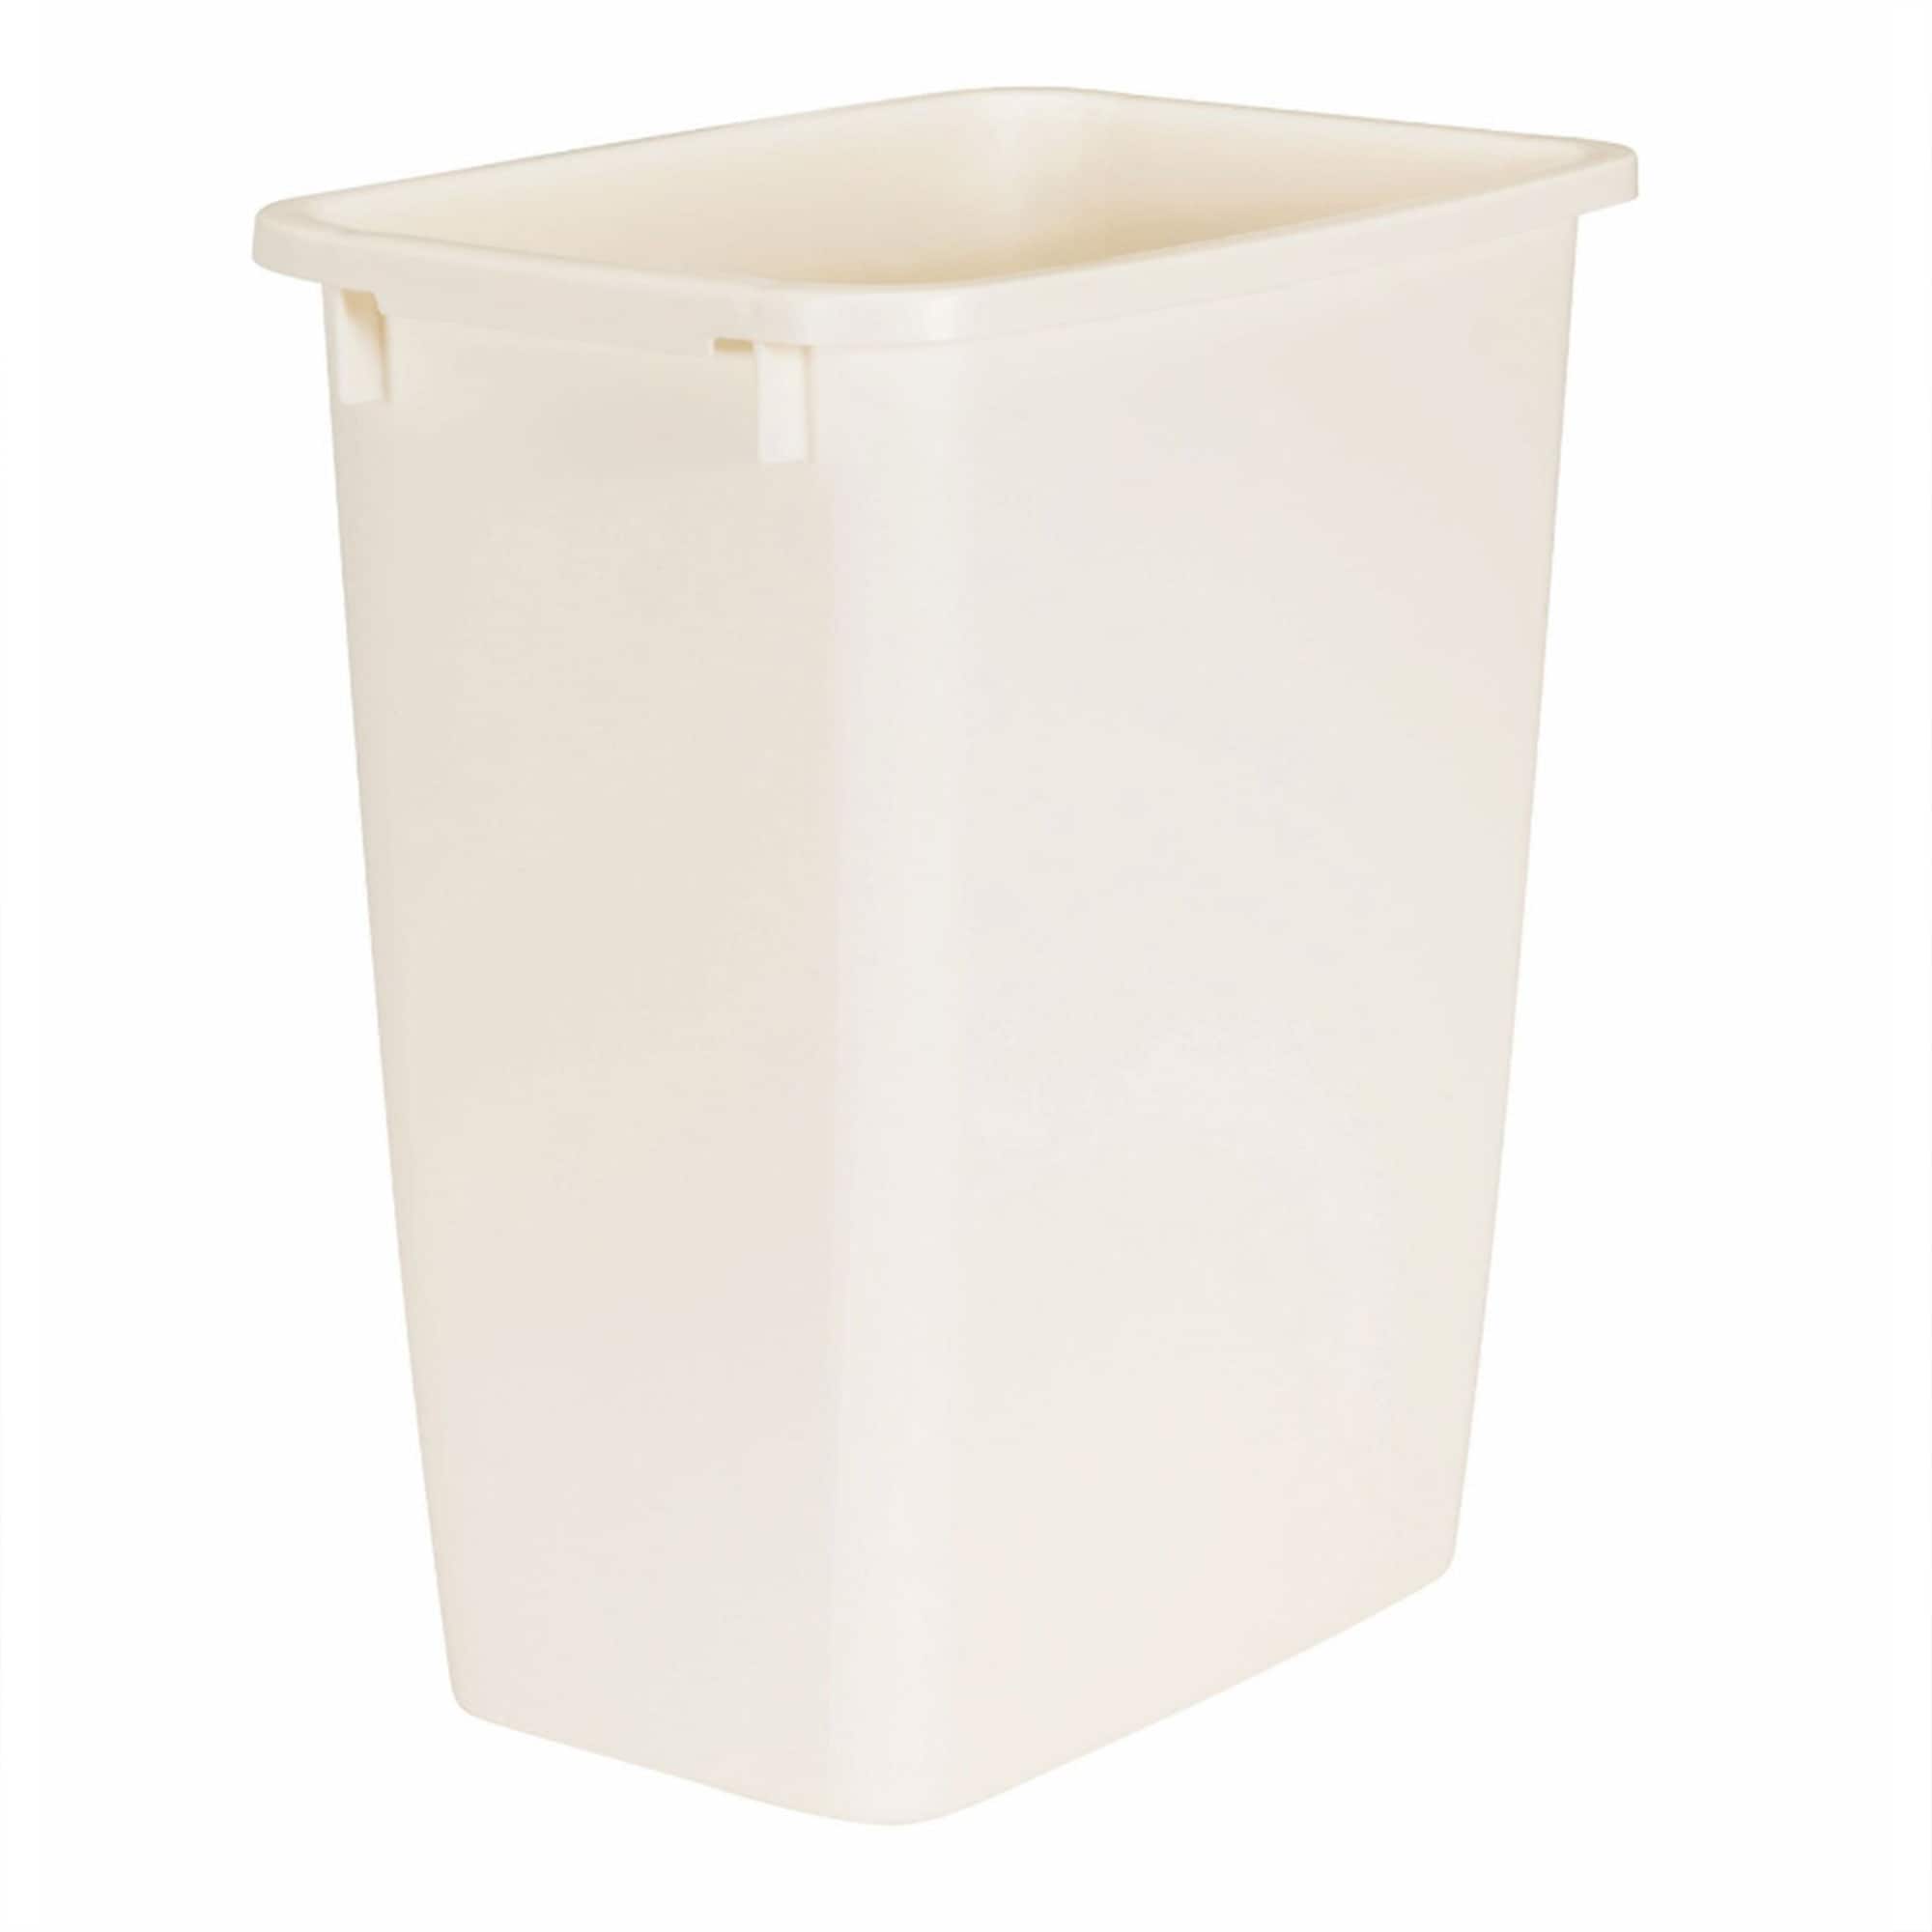 https://ak1.ostkcdn.com/images/products/is/images/direct/639c4cb54b29df393c35dc516c744ccc13bc671a/Rubbermaid-21-Quart-Rectangular-Kitchen-Wastebasket-Trash-Can%2C-Bisque-%282-Pack%29.jpg